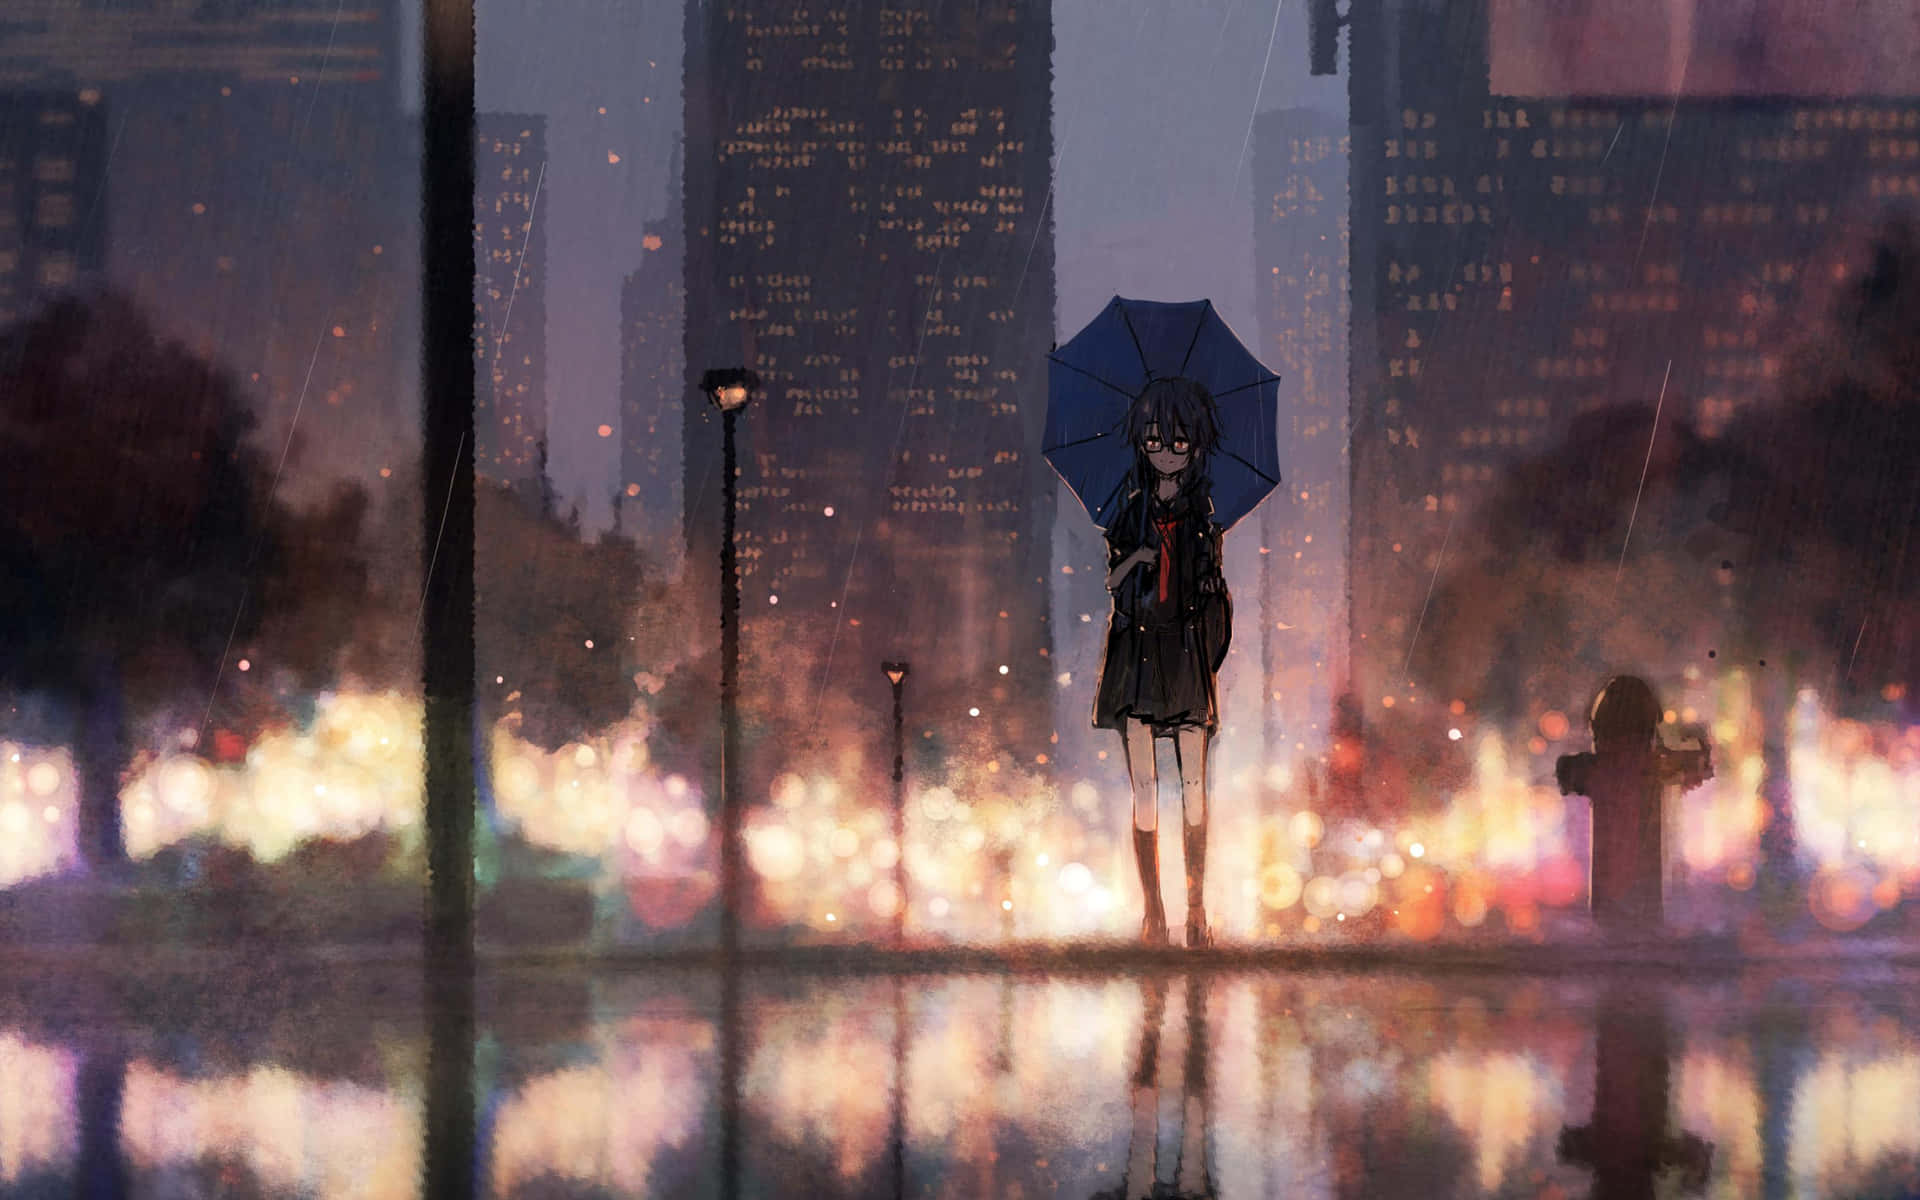 Download Feel the Rain of Anime | Wallpapers.com